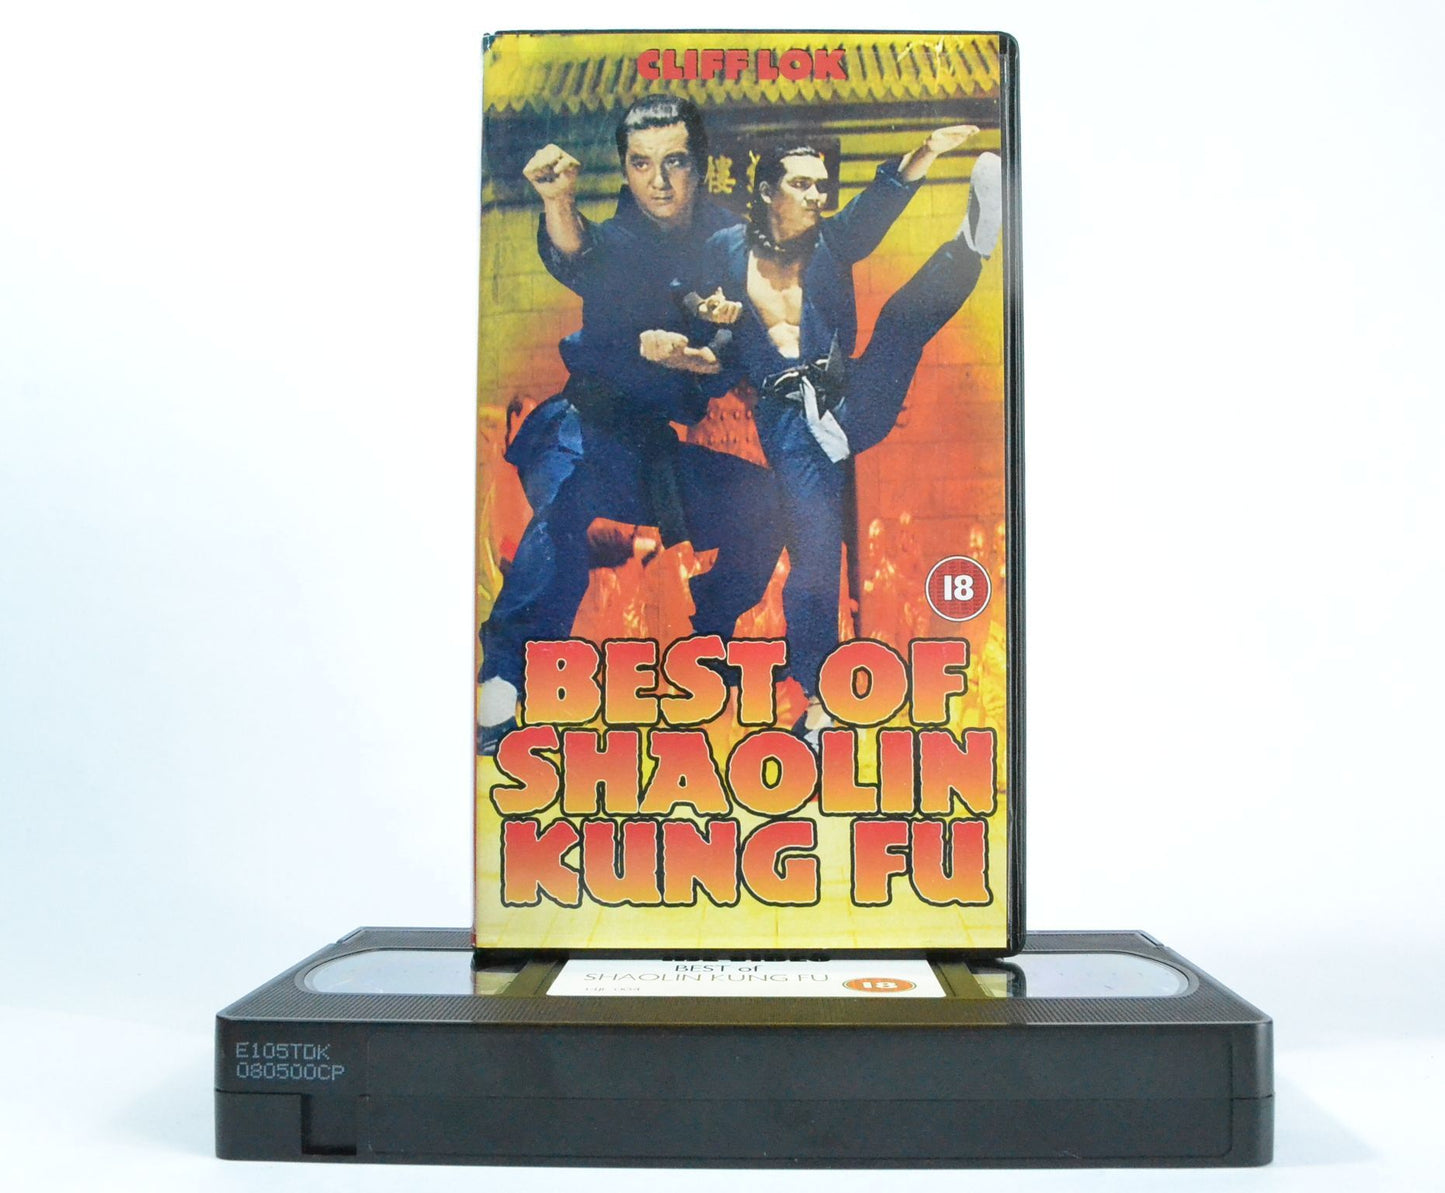 Best Of Shaolin Kung-Fu: Cliff Lok - Eng SUBS (1998) Deathly Ming Mission - VHS-